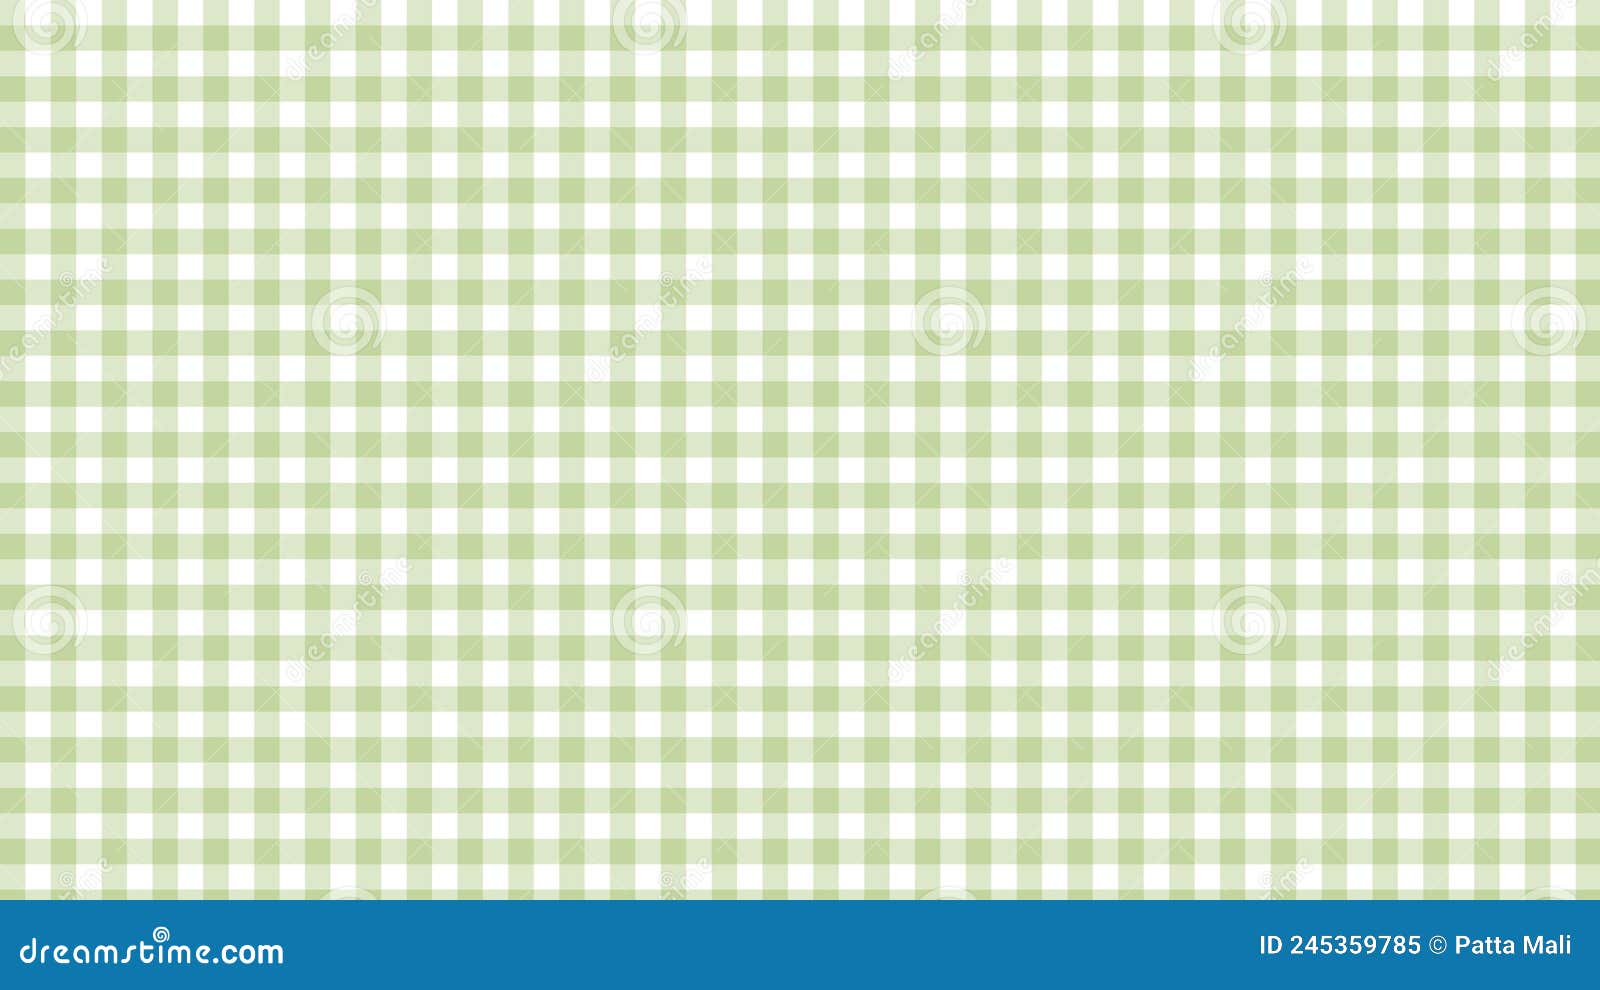 Check Wallpaper Vector Images over 38000